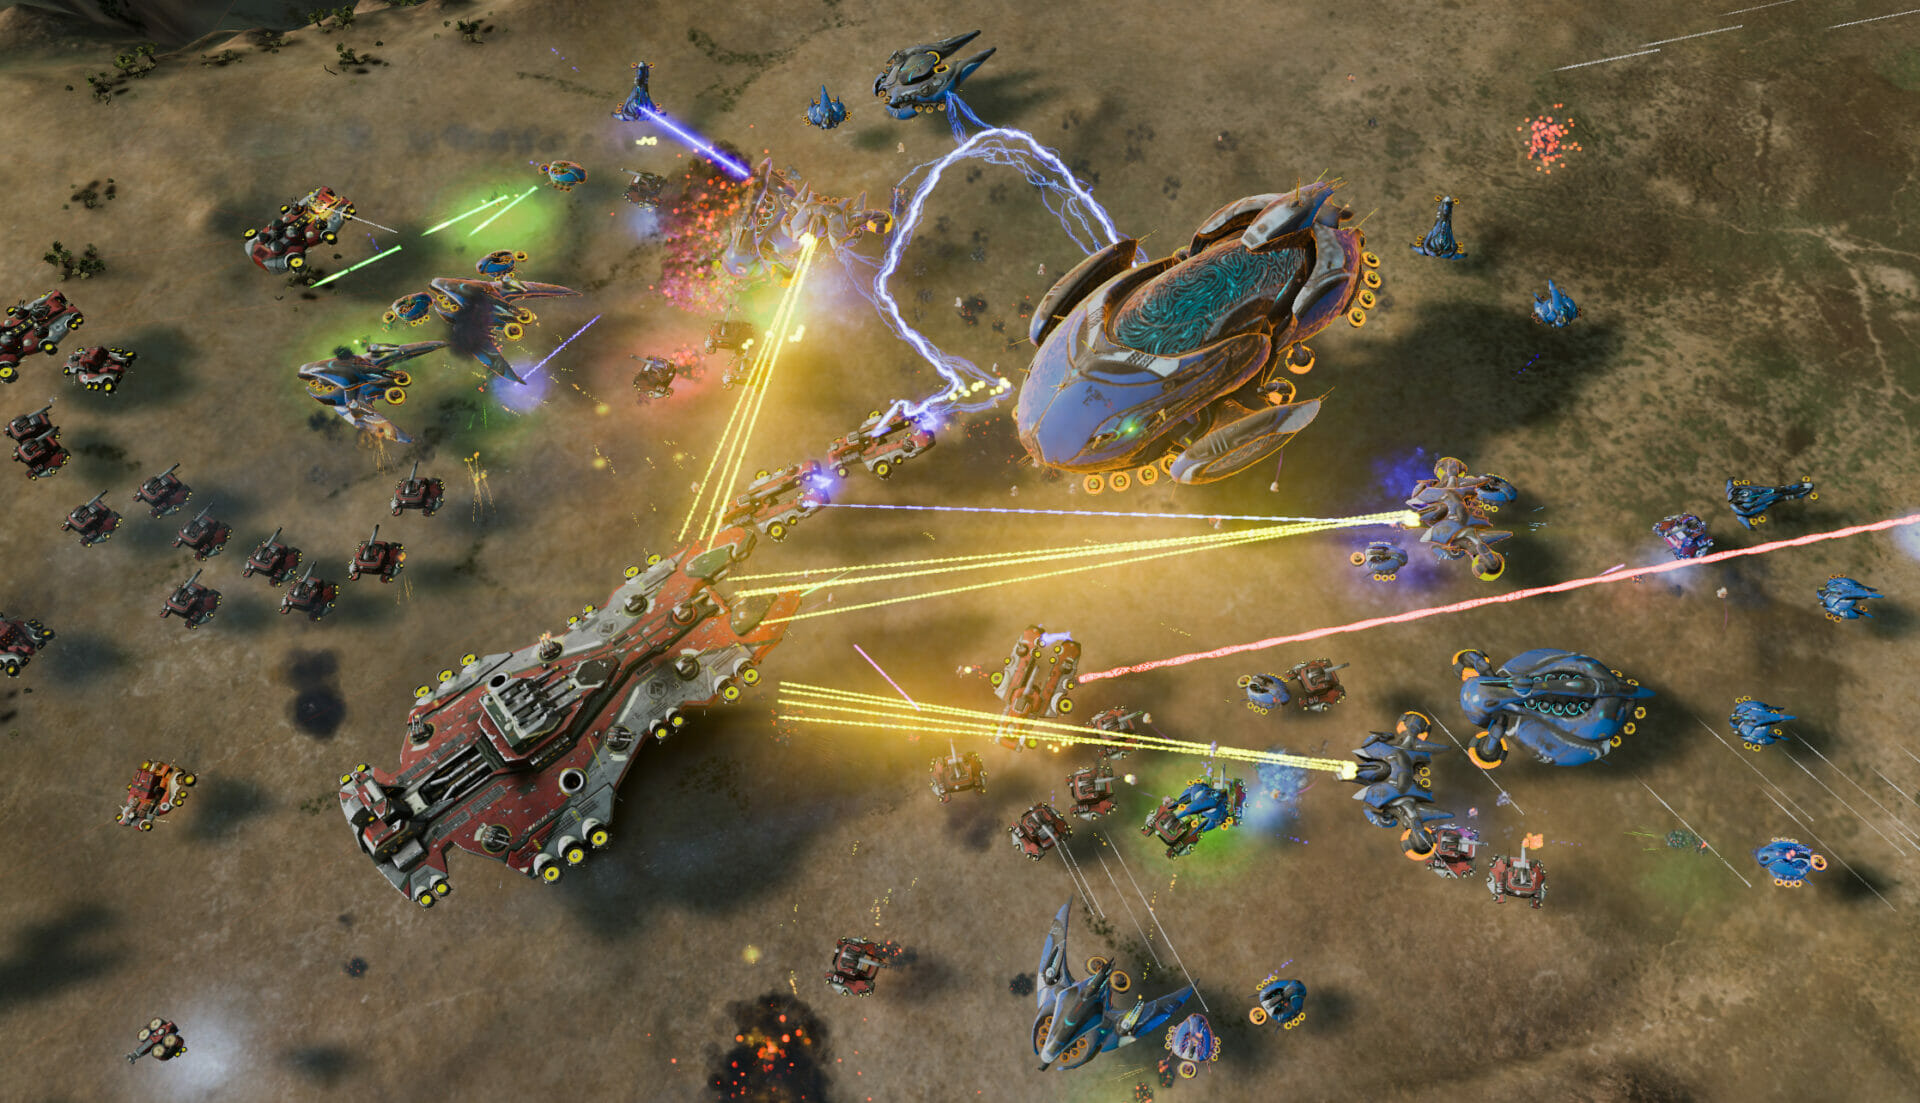 The game in question is Ashes of the Singularity: Escalation, a real-time strategy game released for the Windows operating system in March 2016 .